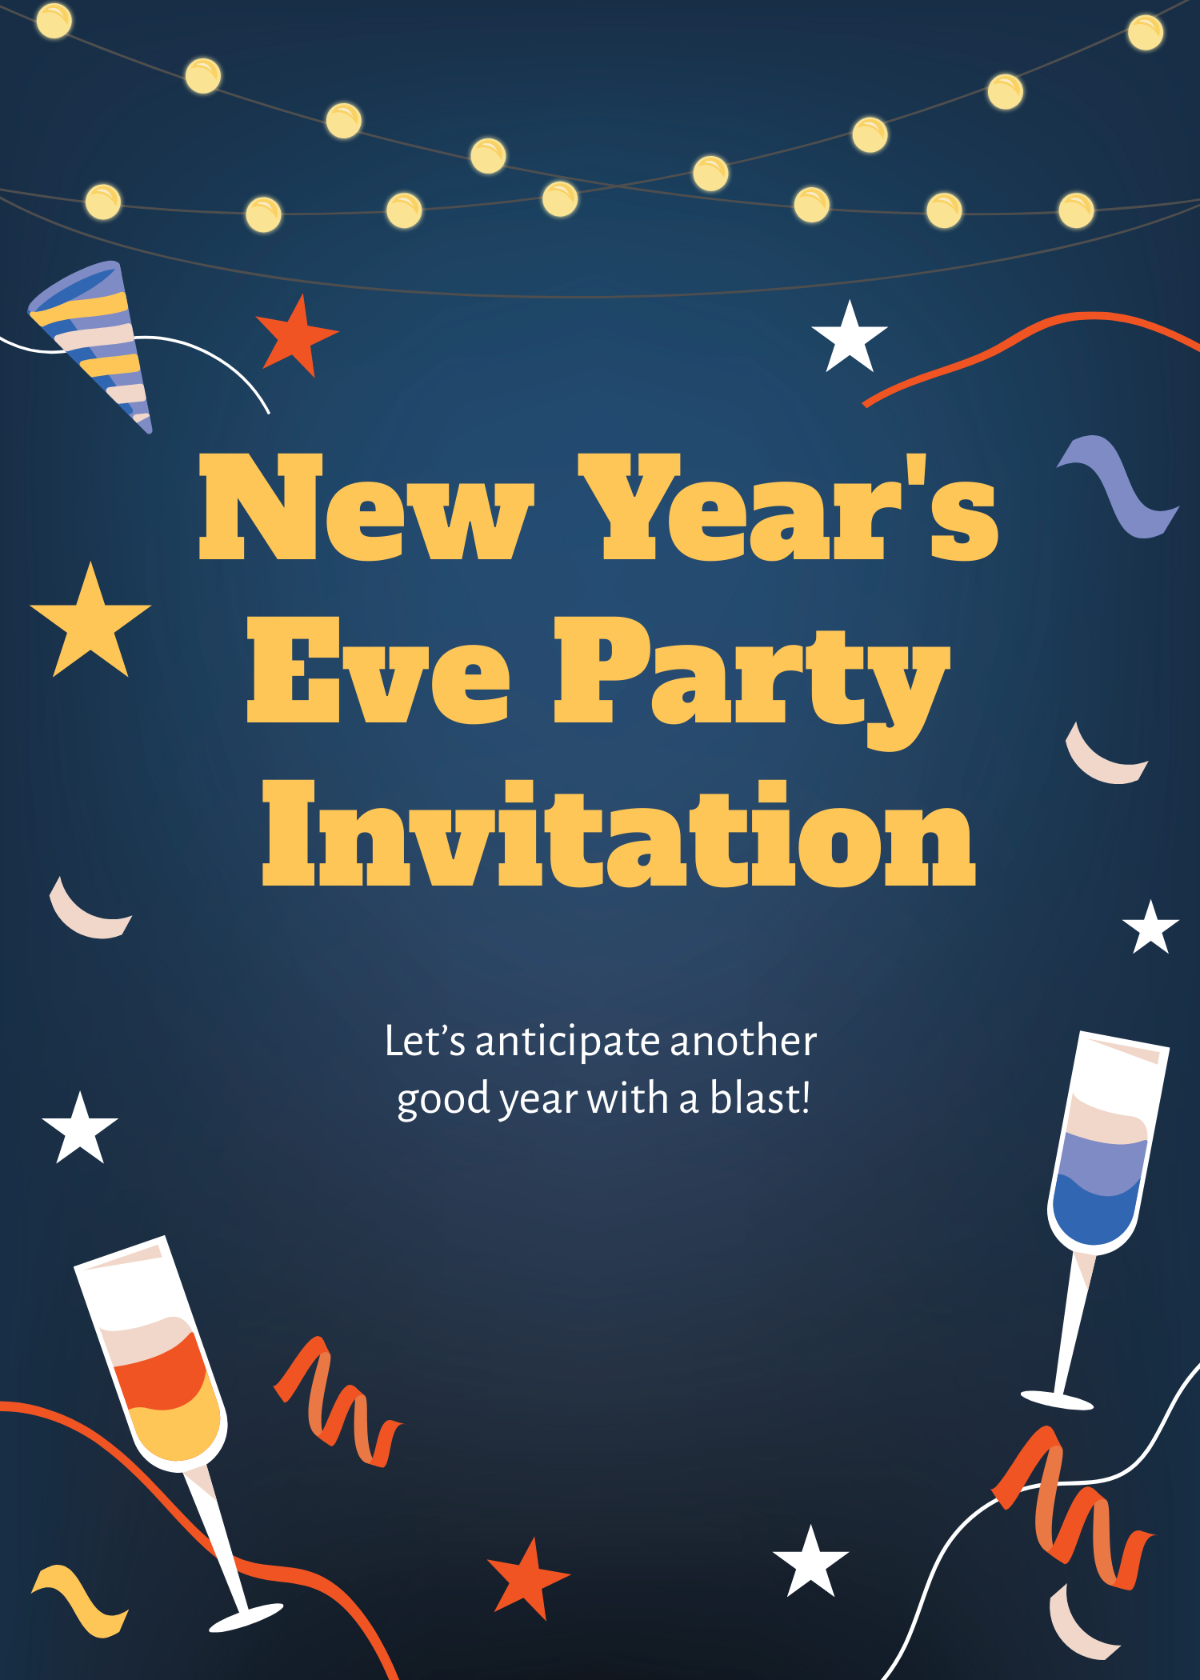 New Year's Eve Party Invitation Template